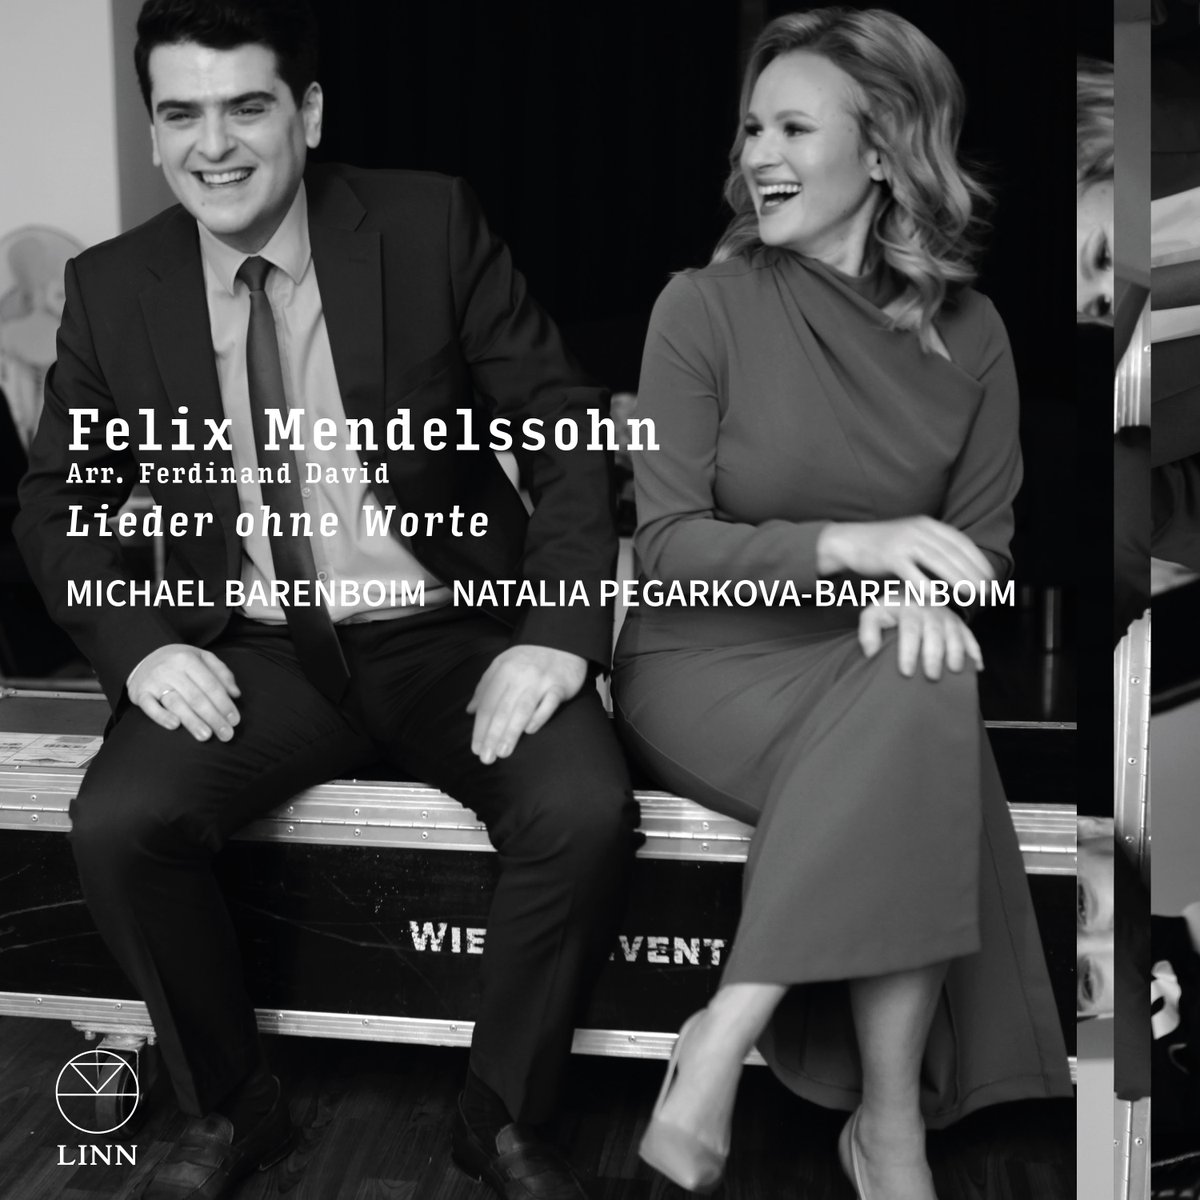 'These are performances we can admire without reservation and they make for compulsive listening.' @GramophoneMag reviews the new Mendelssohn album from violinist Michael Barenboim & pianist Natalia Pegarkova-Barenboim. ► Lieder ohne Worte is out now: lnk.to/MendelssohnLie…